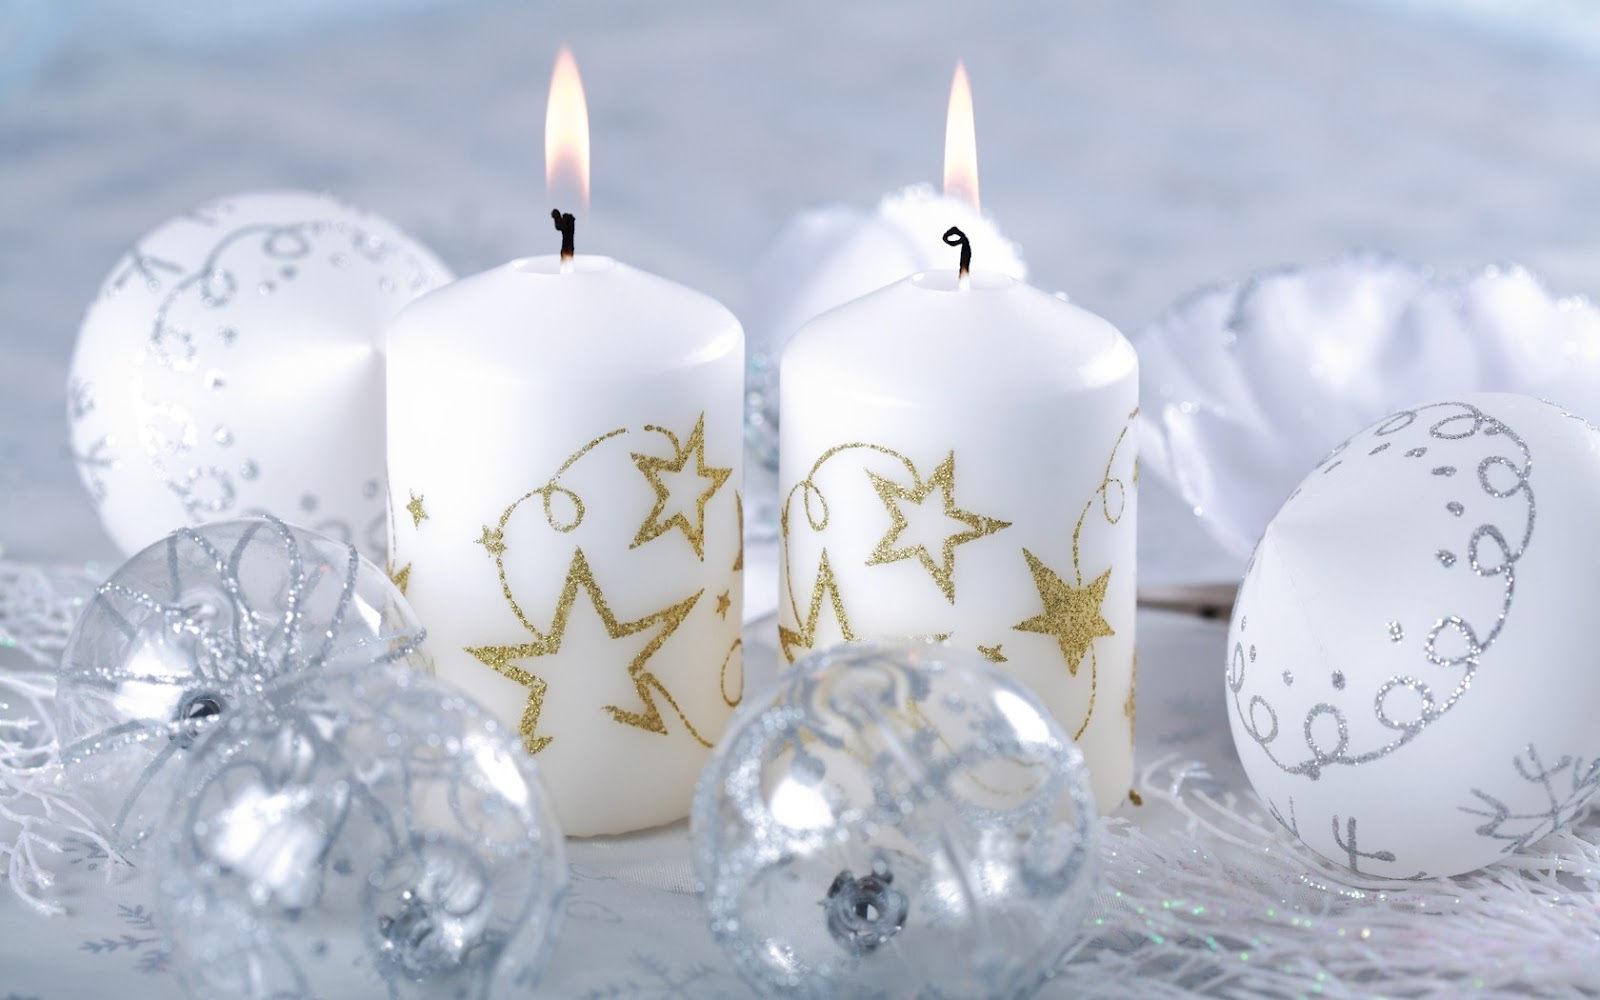  candles wallpapers for Christmas Star Xmas Tree snowman candy are